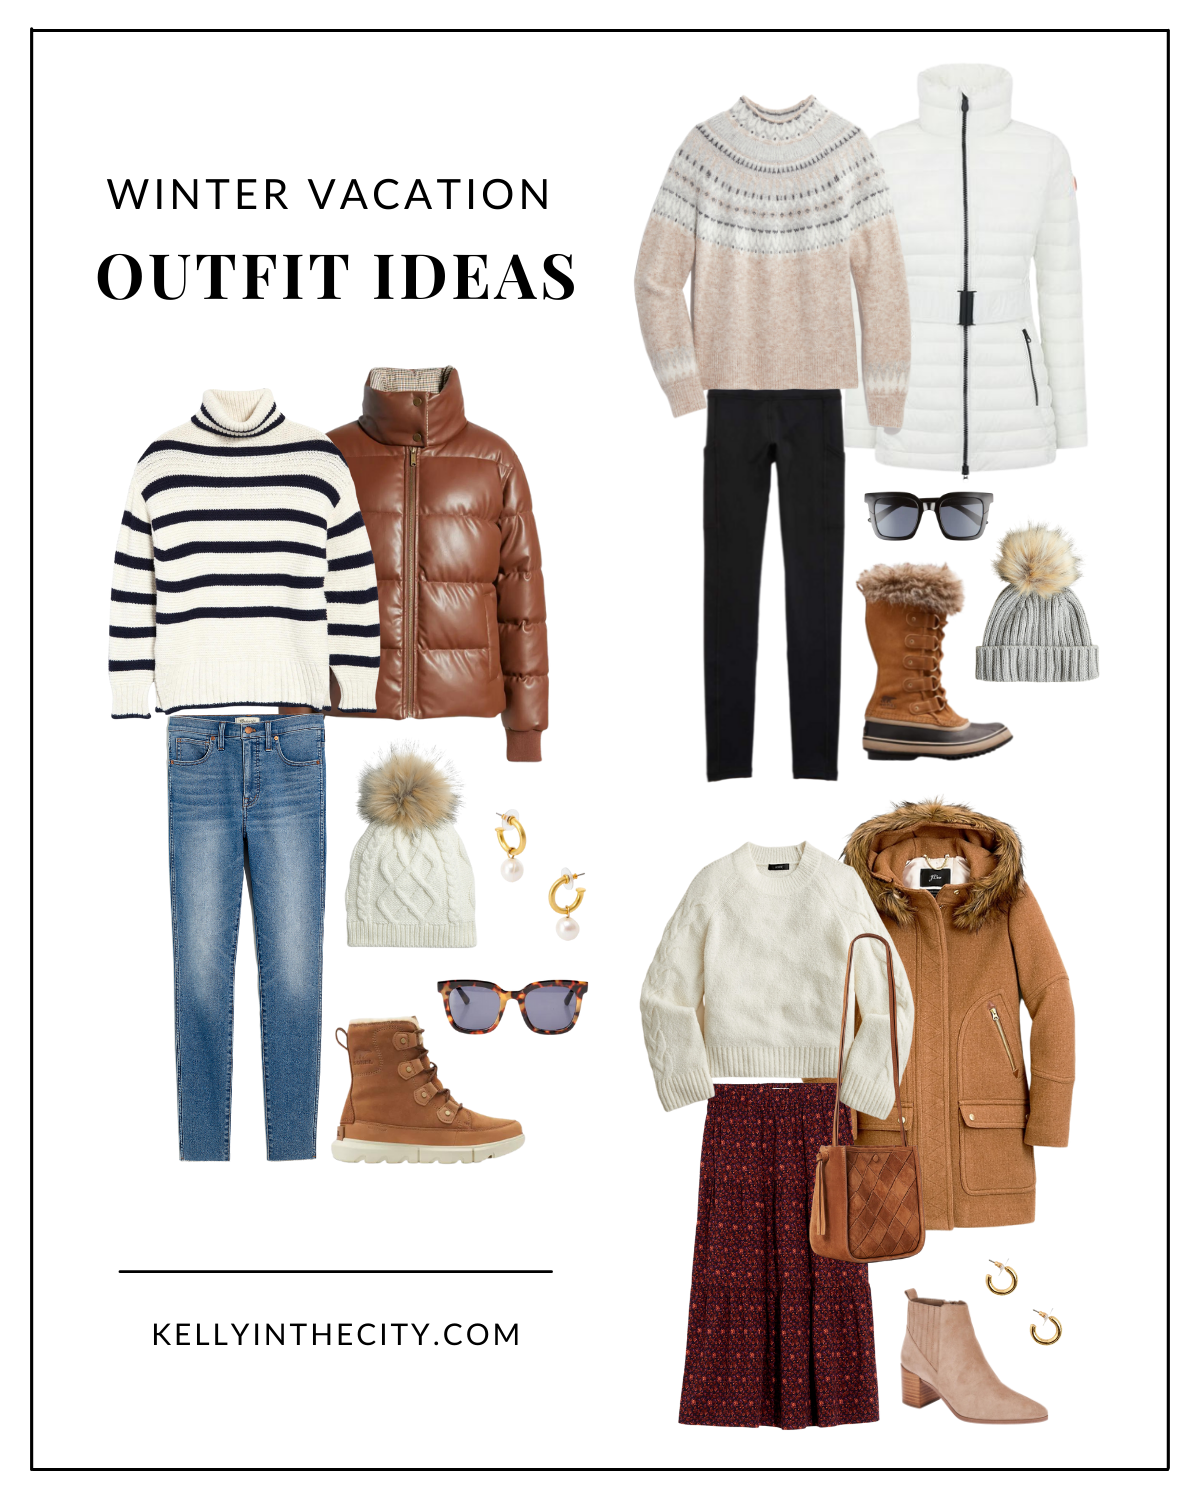 Winter Vacation Outfit Ideas